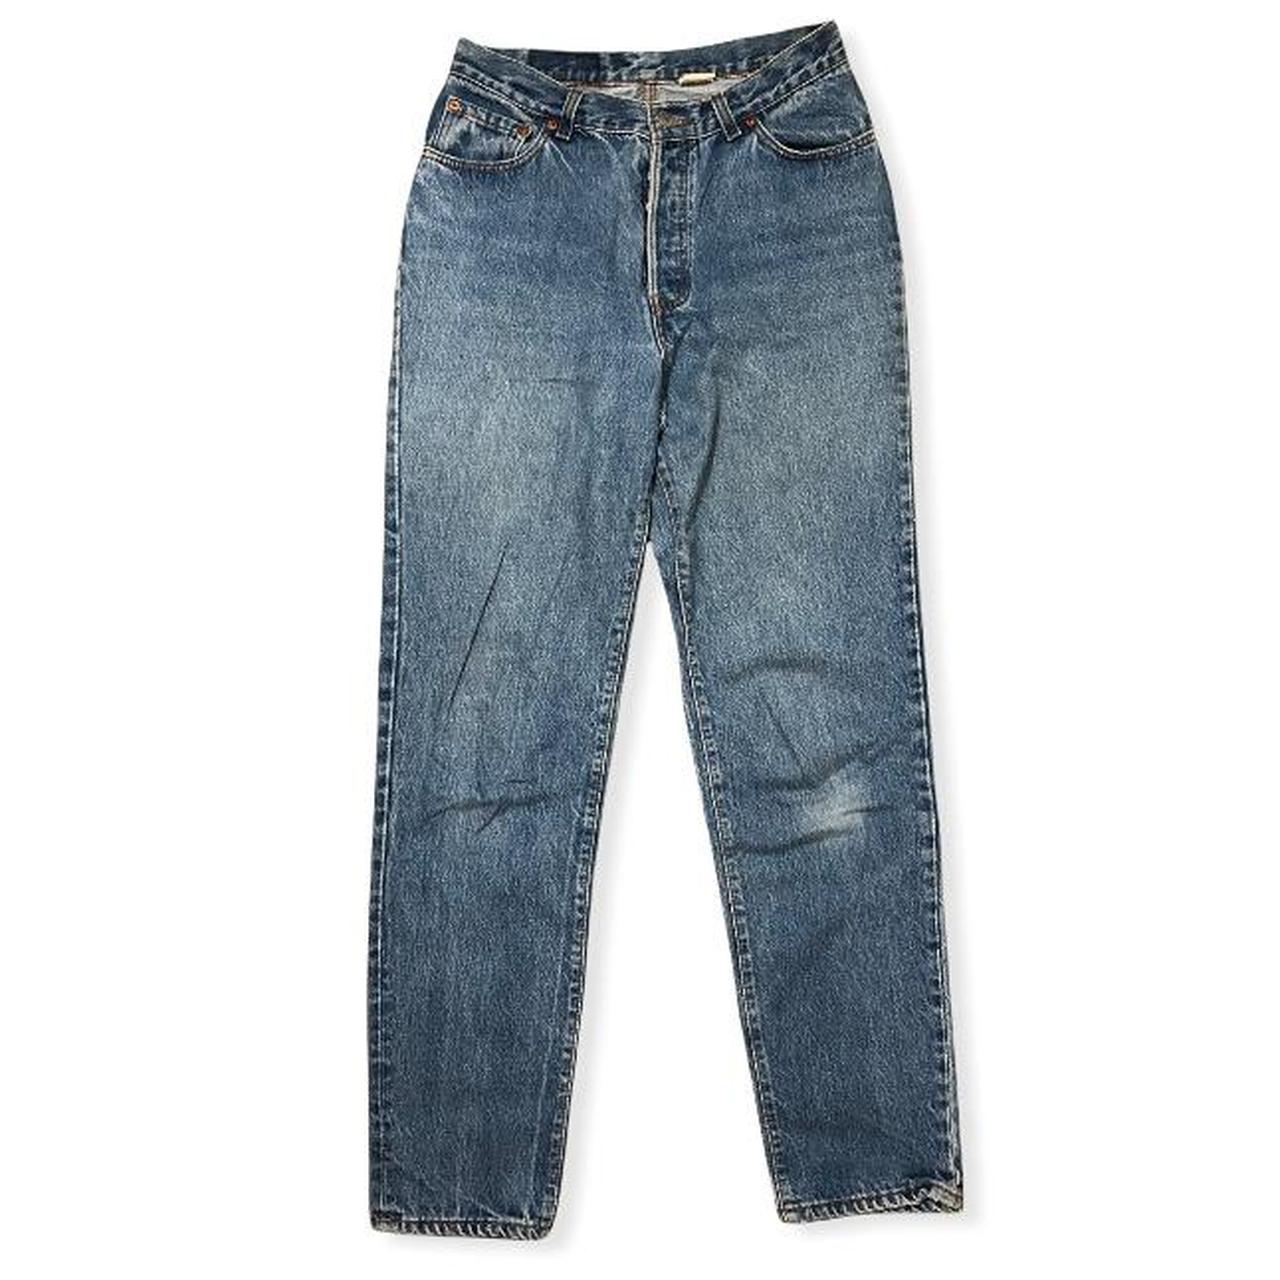 Levi's 501 Jeans For Women - Available Today with Free Shipping!*